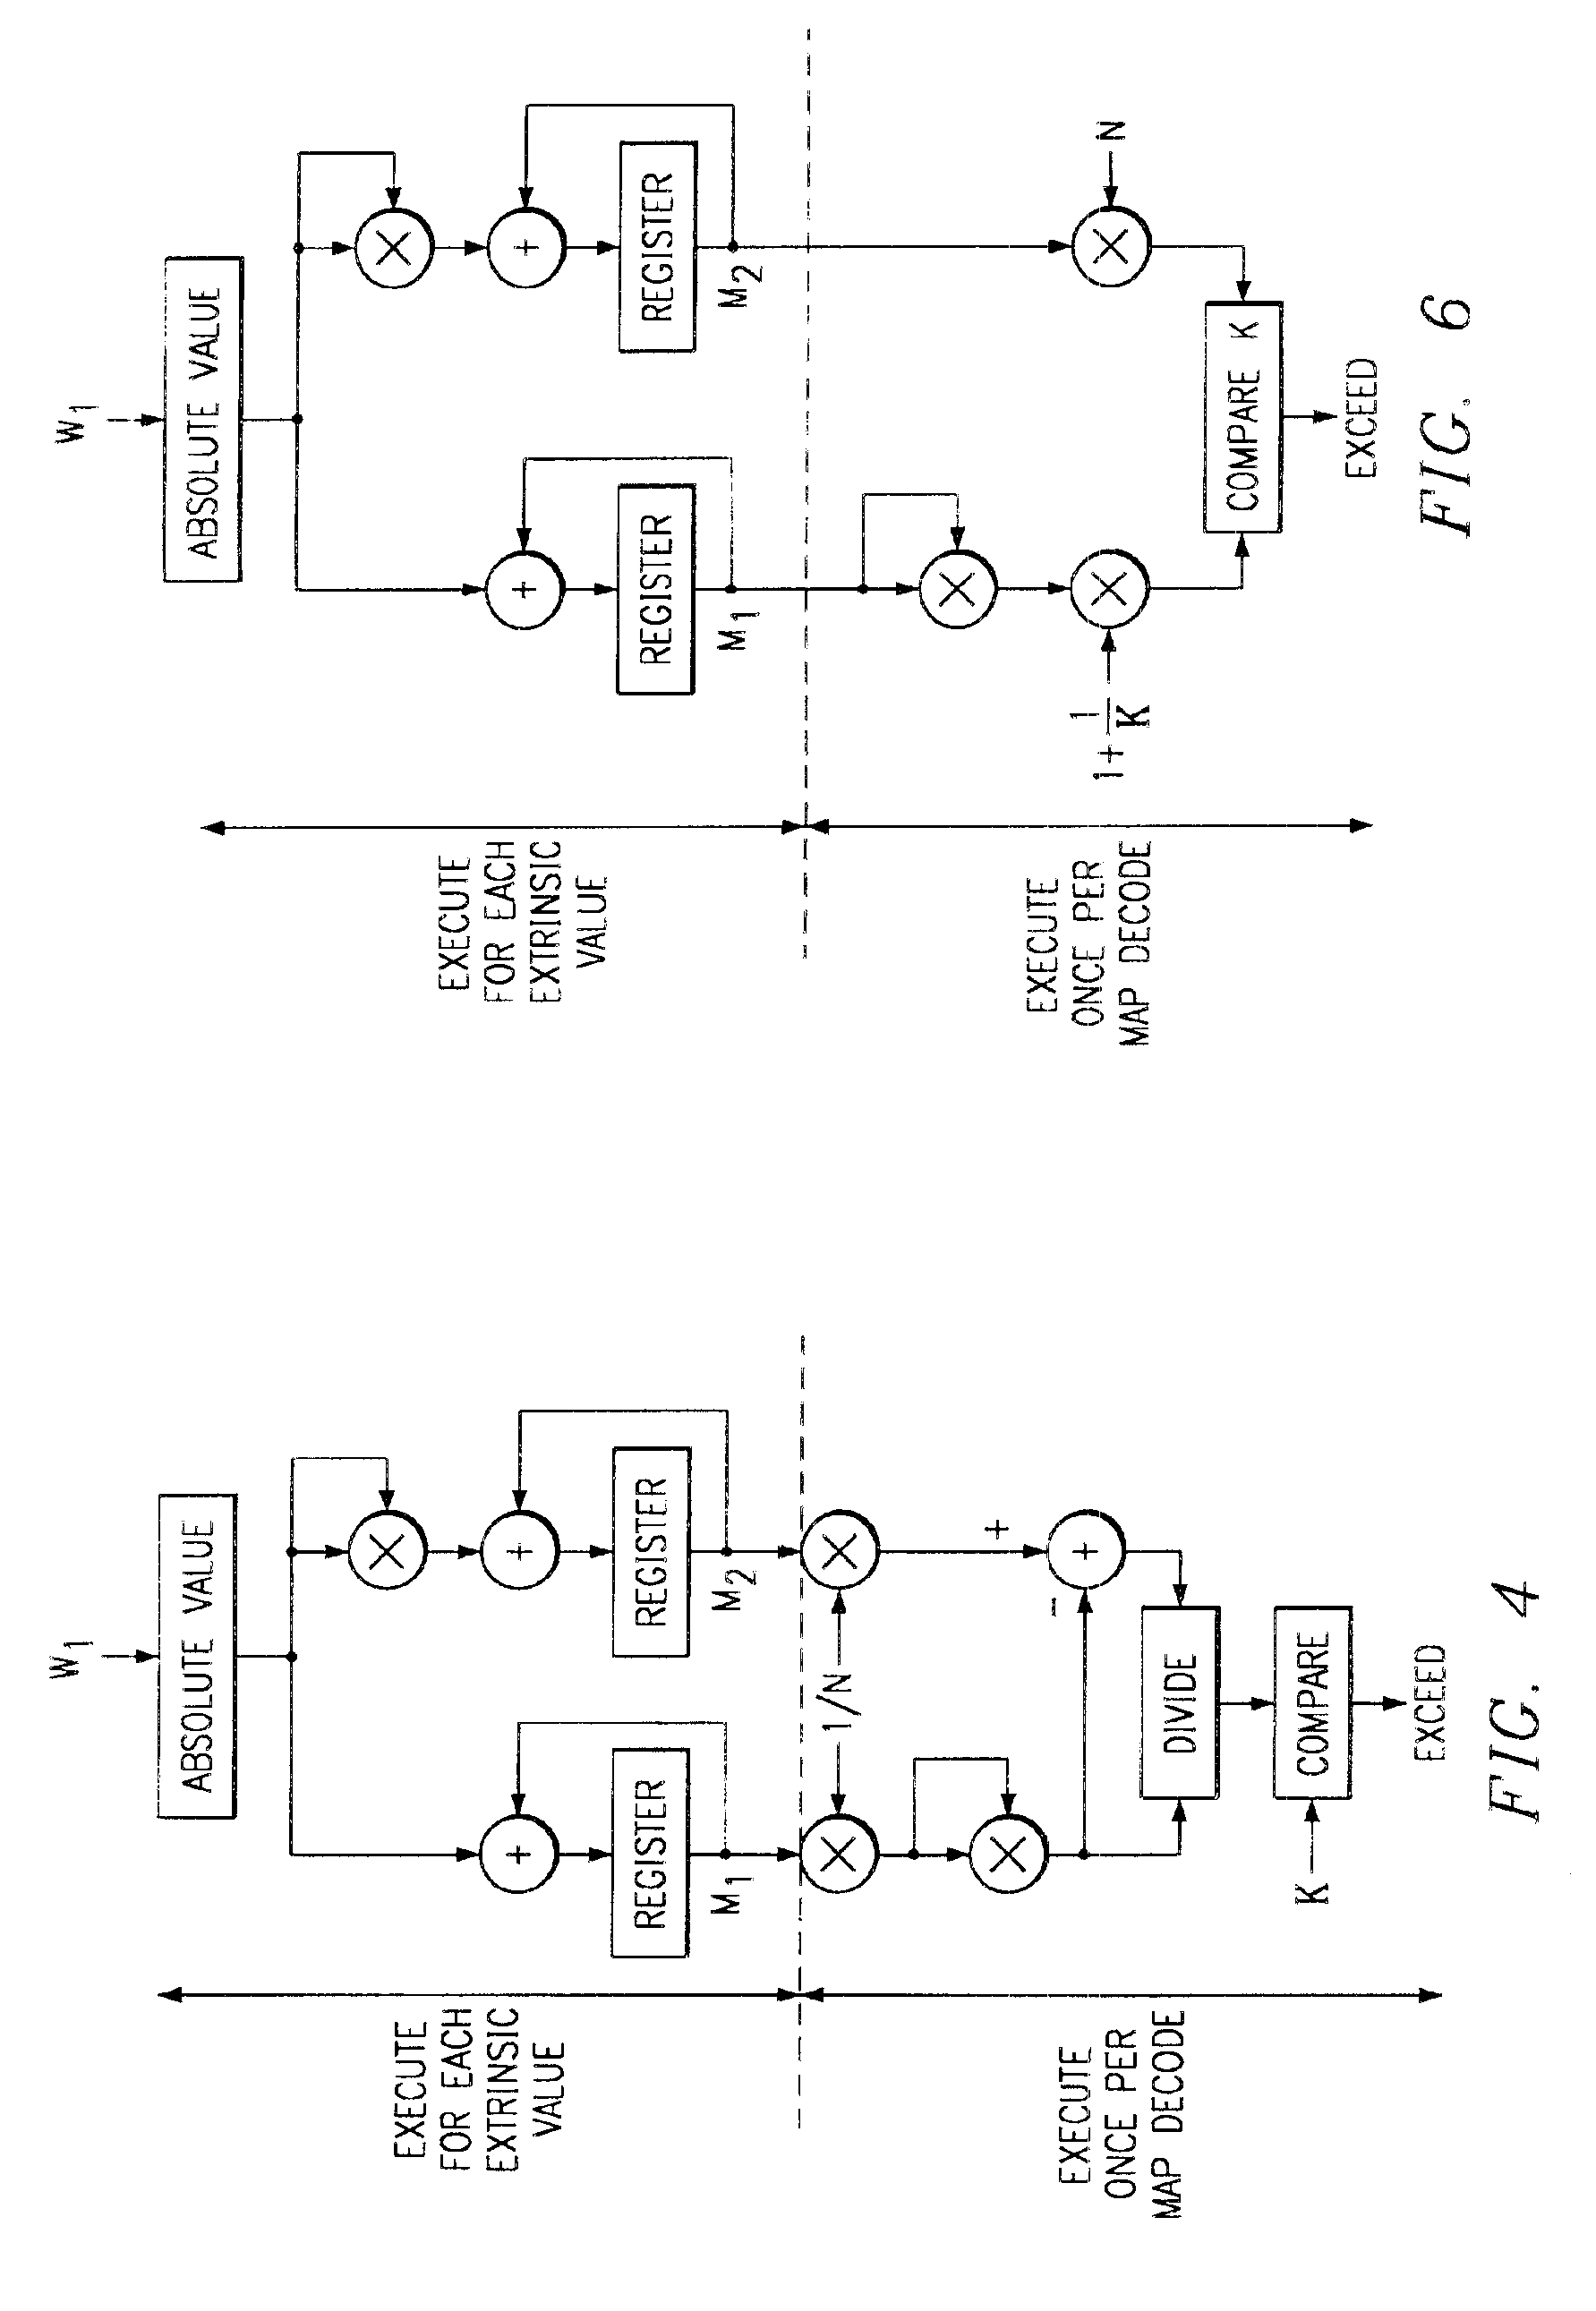 Turbo decoder stopping based on mean and variance of extrinsics